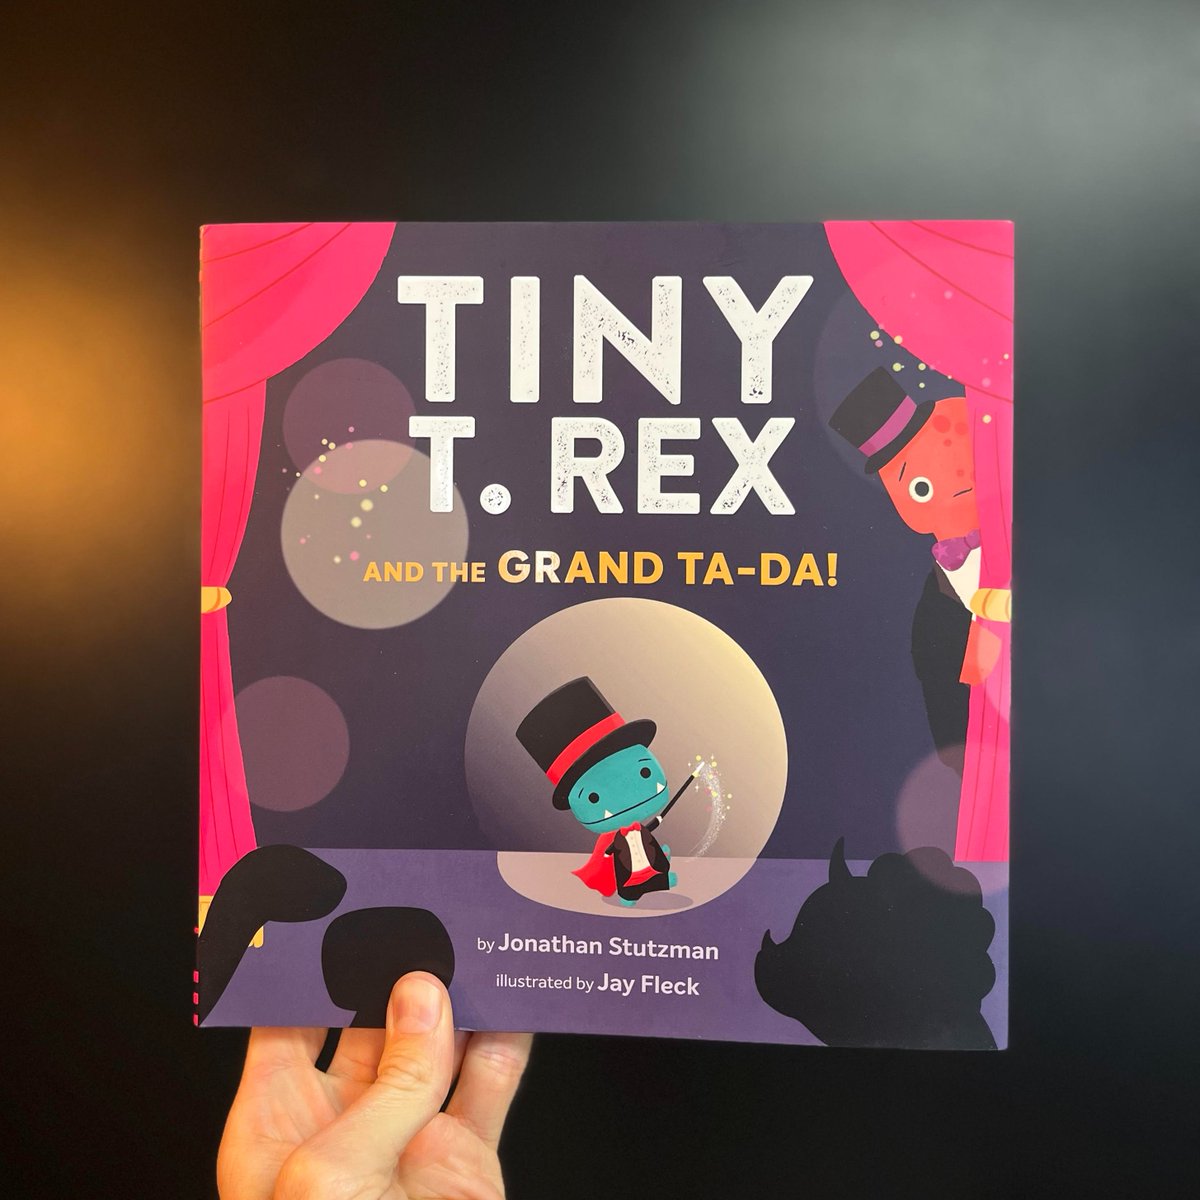 🦖🌟 TINY T. REX BOOK GIVEAWAY! 🌟🦖 Tiny's new adventure TINY T. REX AND THE GRAND TA-DA! is out next week! 🪄 To celebrate I'm giving away 7 copies! To enter: 🌟 Like/Retweet 🌟 Comment & tag a friend who makes life more magical 🌟 Use #tinytrex #tinytrexandthegrandtada